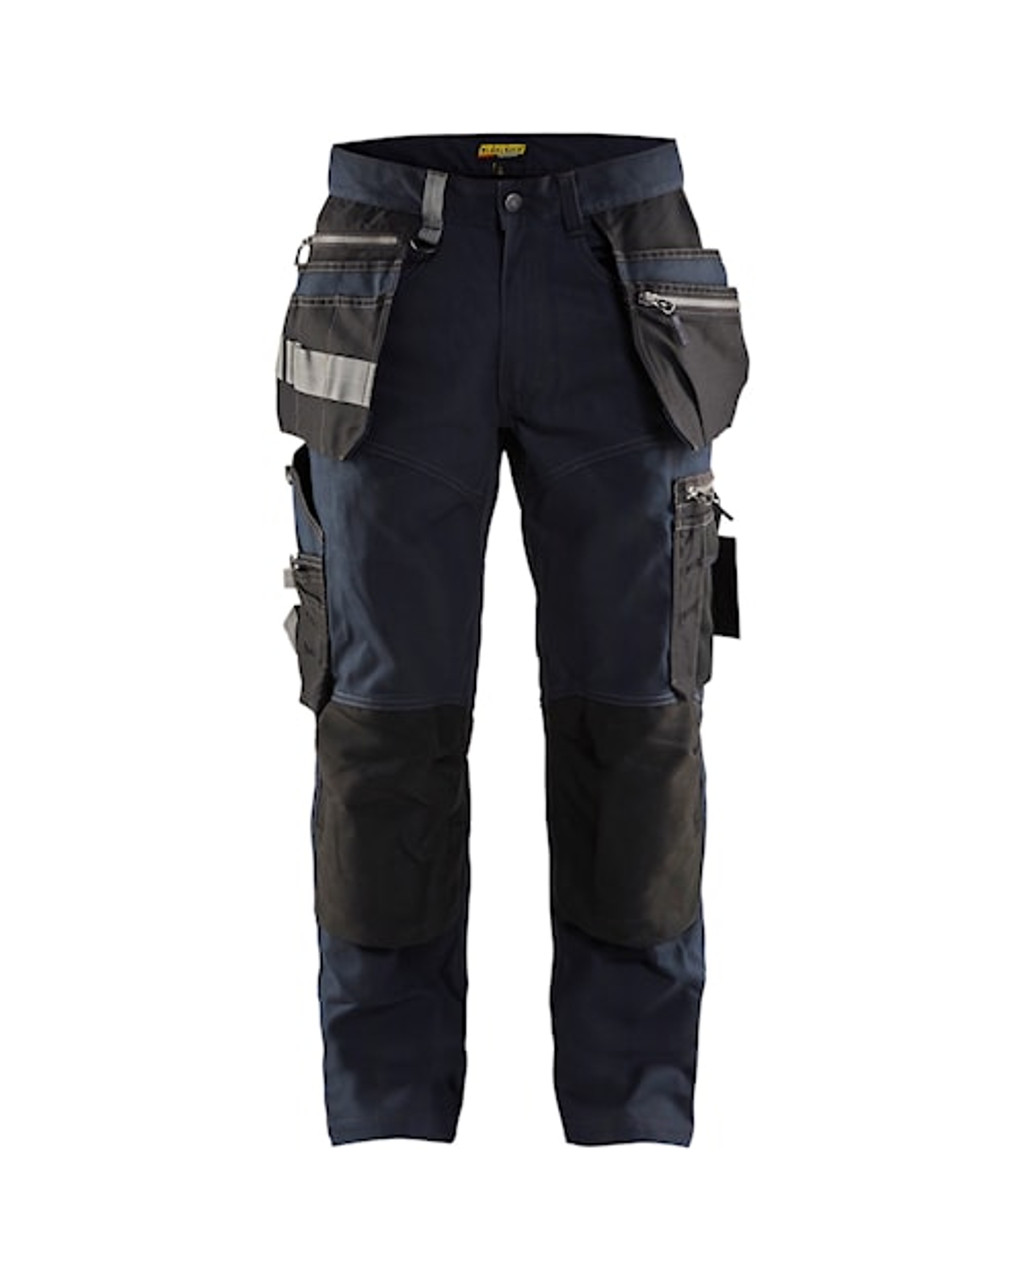 BLAKLADER  Trousers | Craftsman Hardware supplies Construction Jobs, Canvas + Stretch Craftsman Trousers with Holster Pockets for Electricians and Plumbers